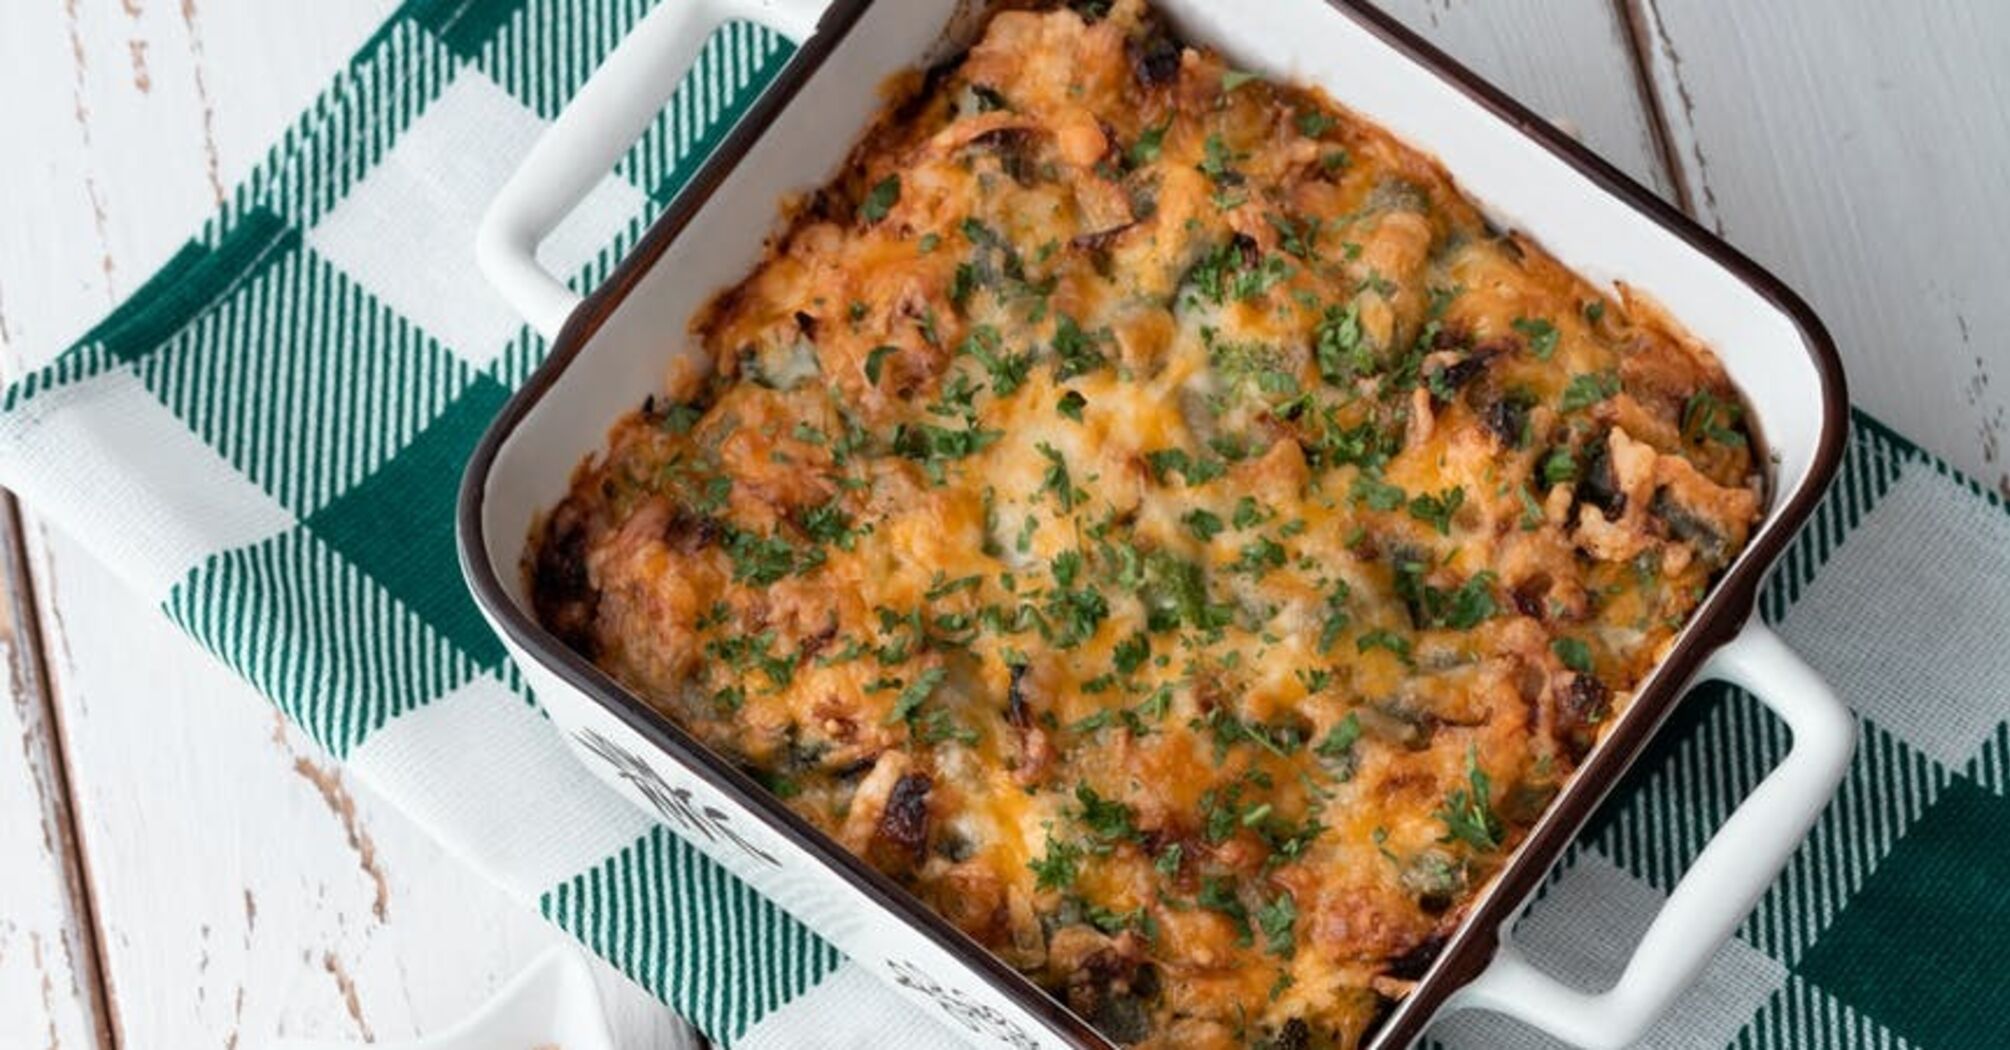 Basic hearty potato casserole: what ingredient to add for tenderness